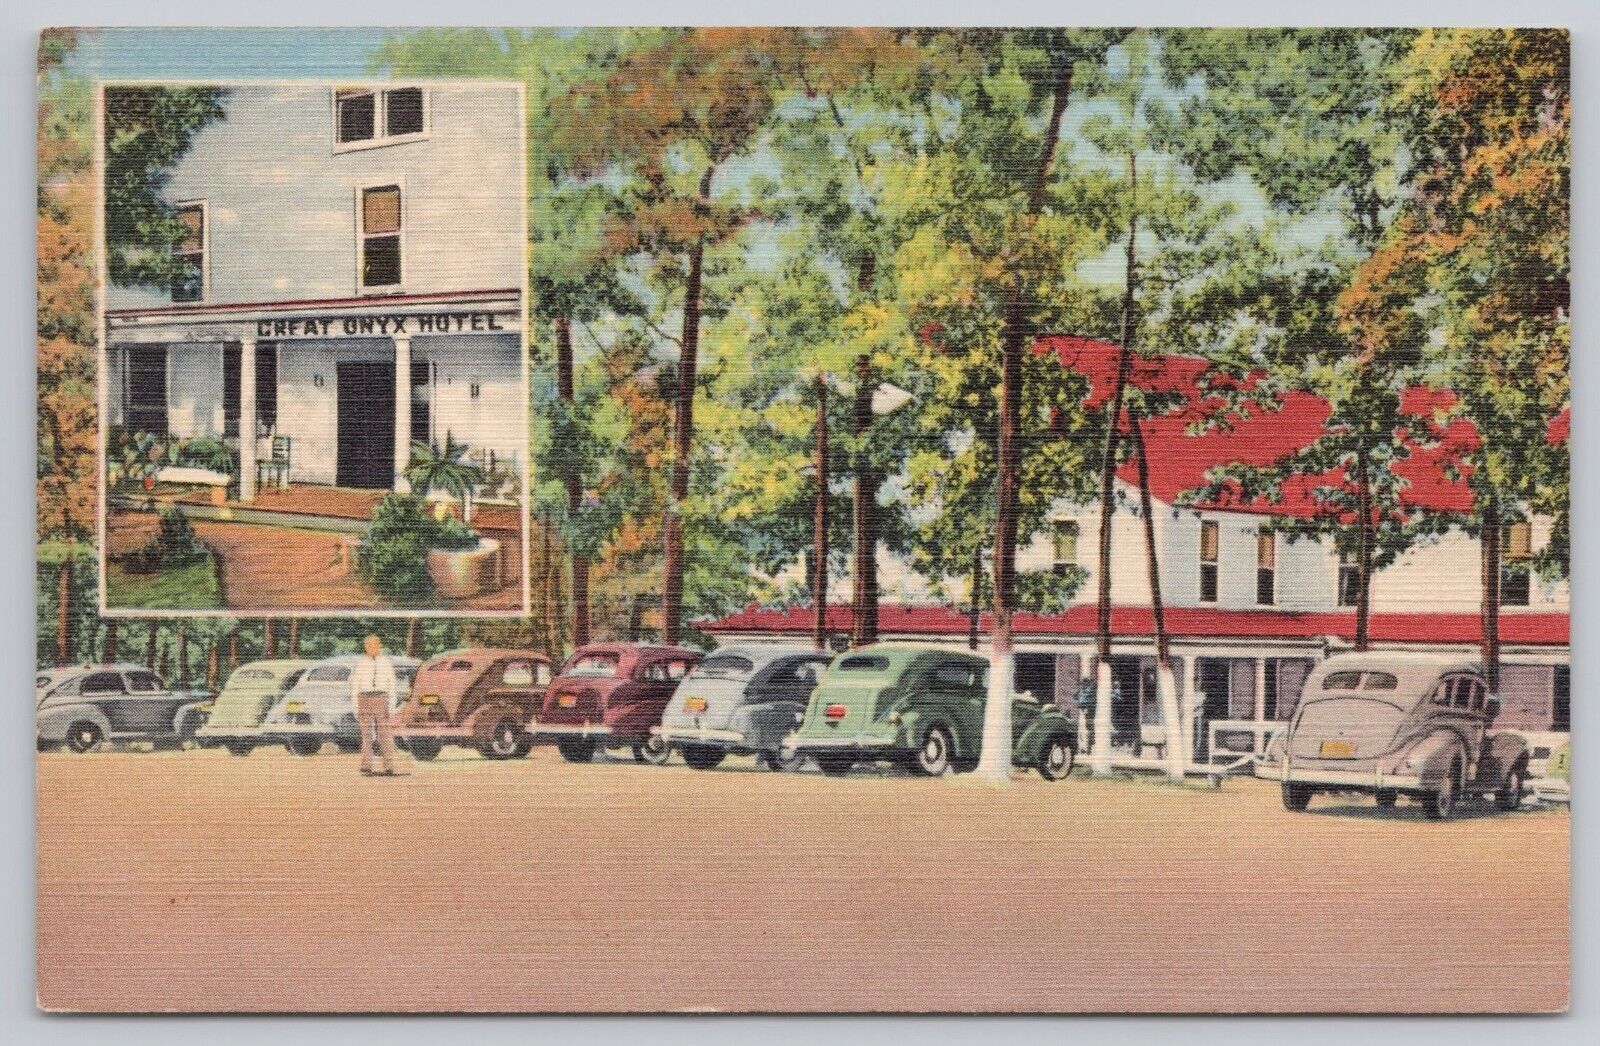 Great Onyx Cave Hotel Mammoth Cave Kentucky KY Vintage Linen Postcard